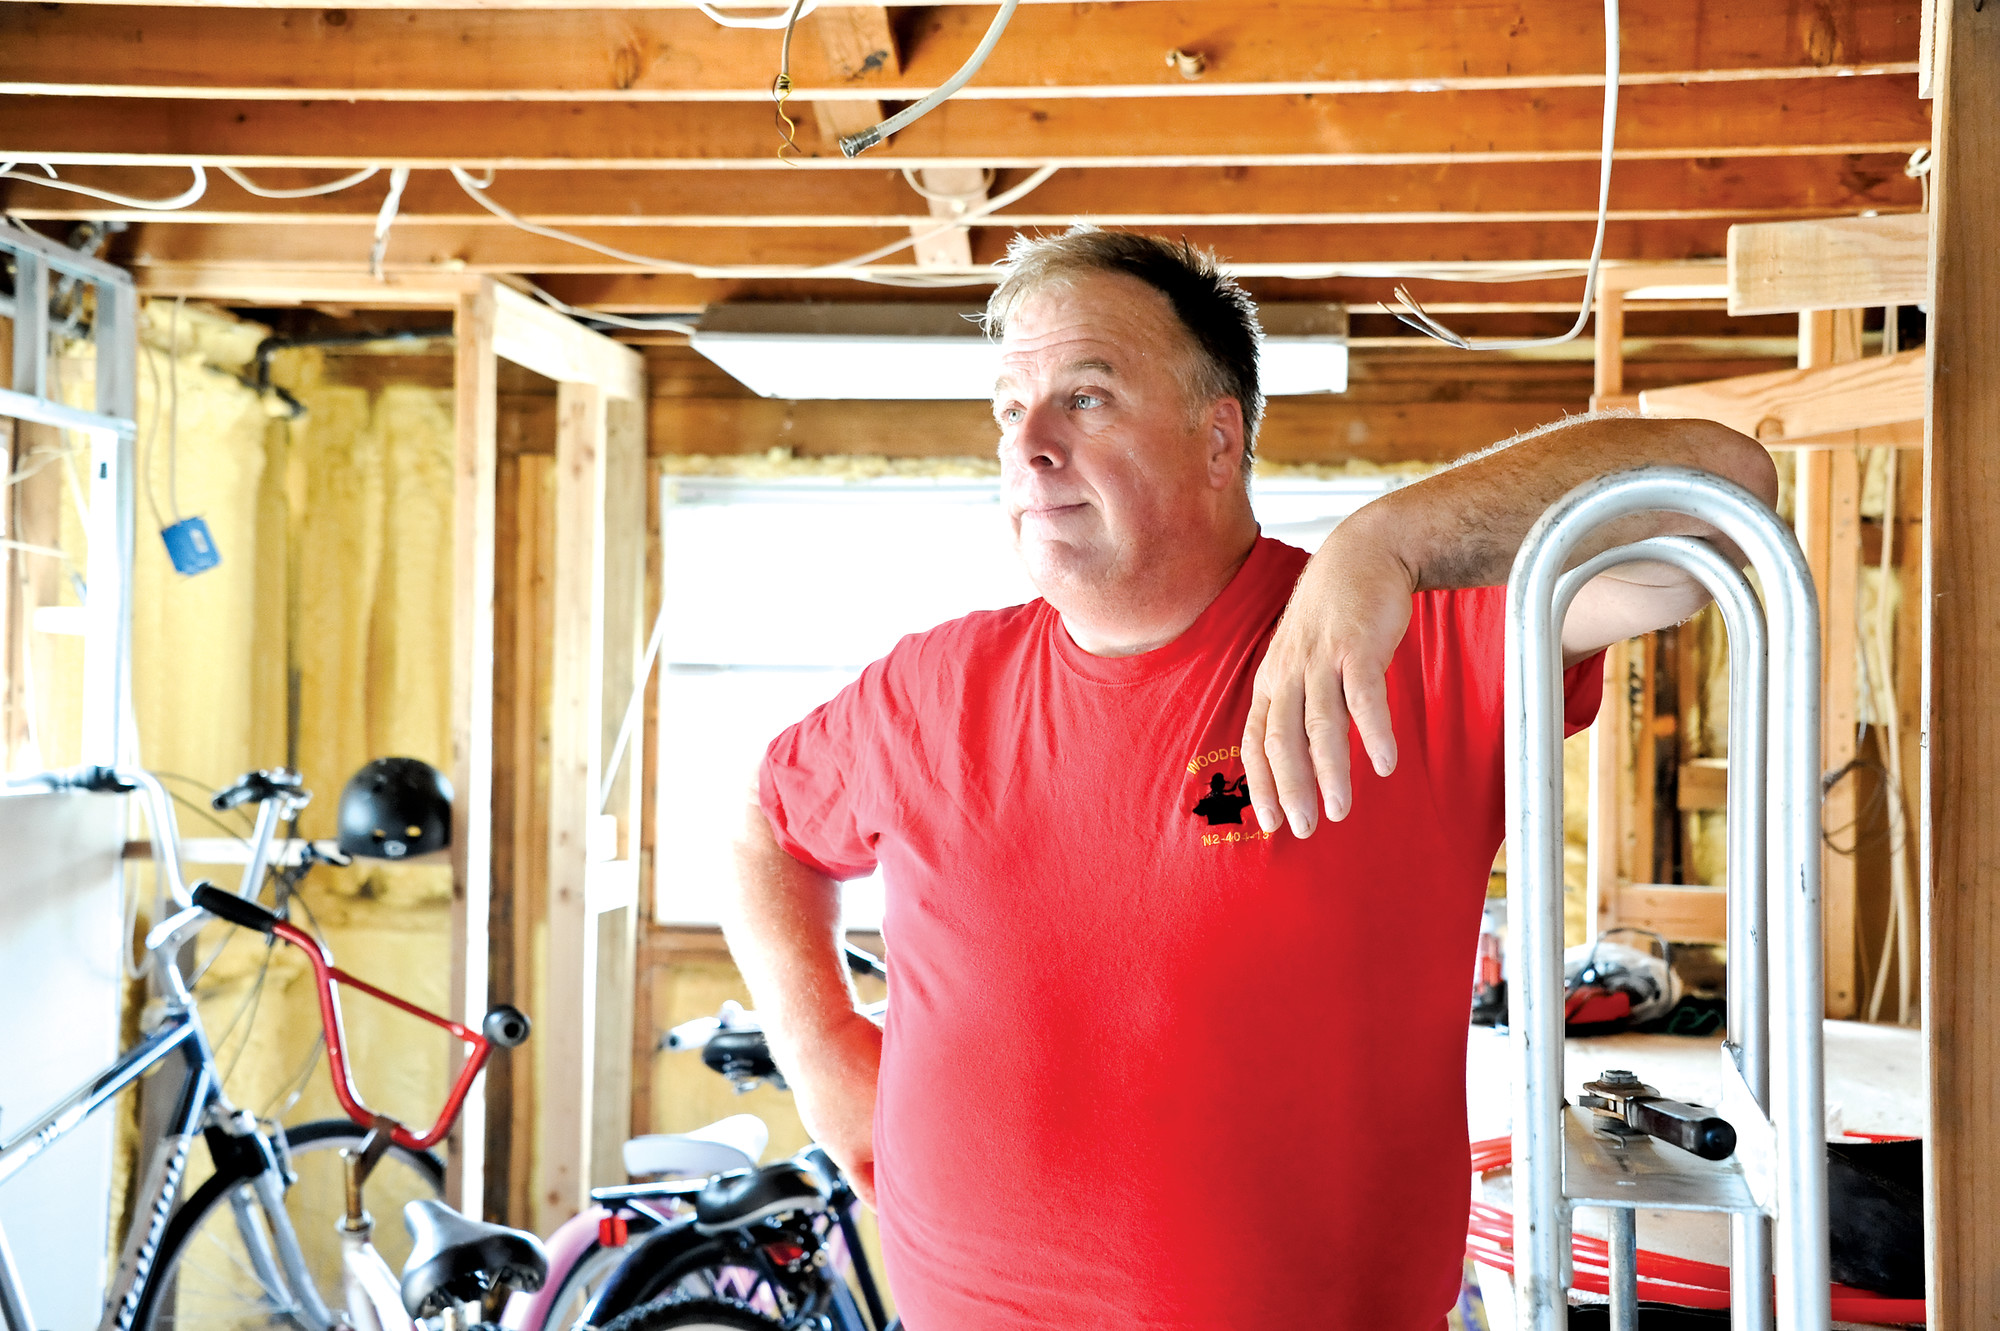 Local plumber James Snow, who is still struggling to repair the damage his East State Street home sustained in Hurricane Sandy, received assistance last week from State Assemblyman Todd Kaminsky and Rebuilding Together Long Island.